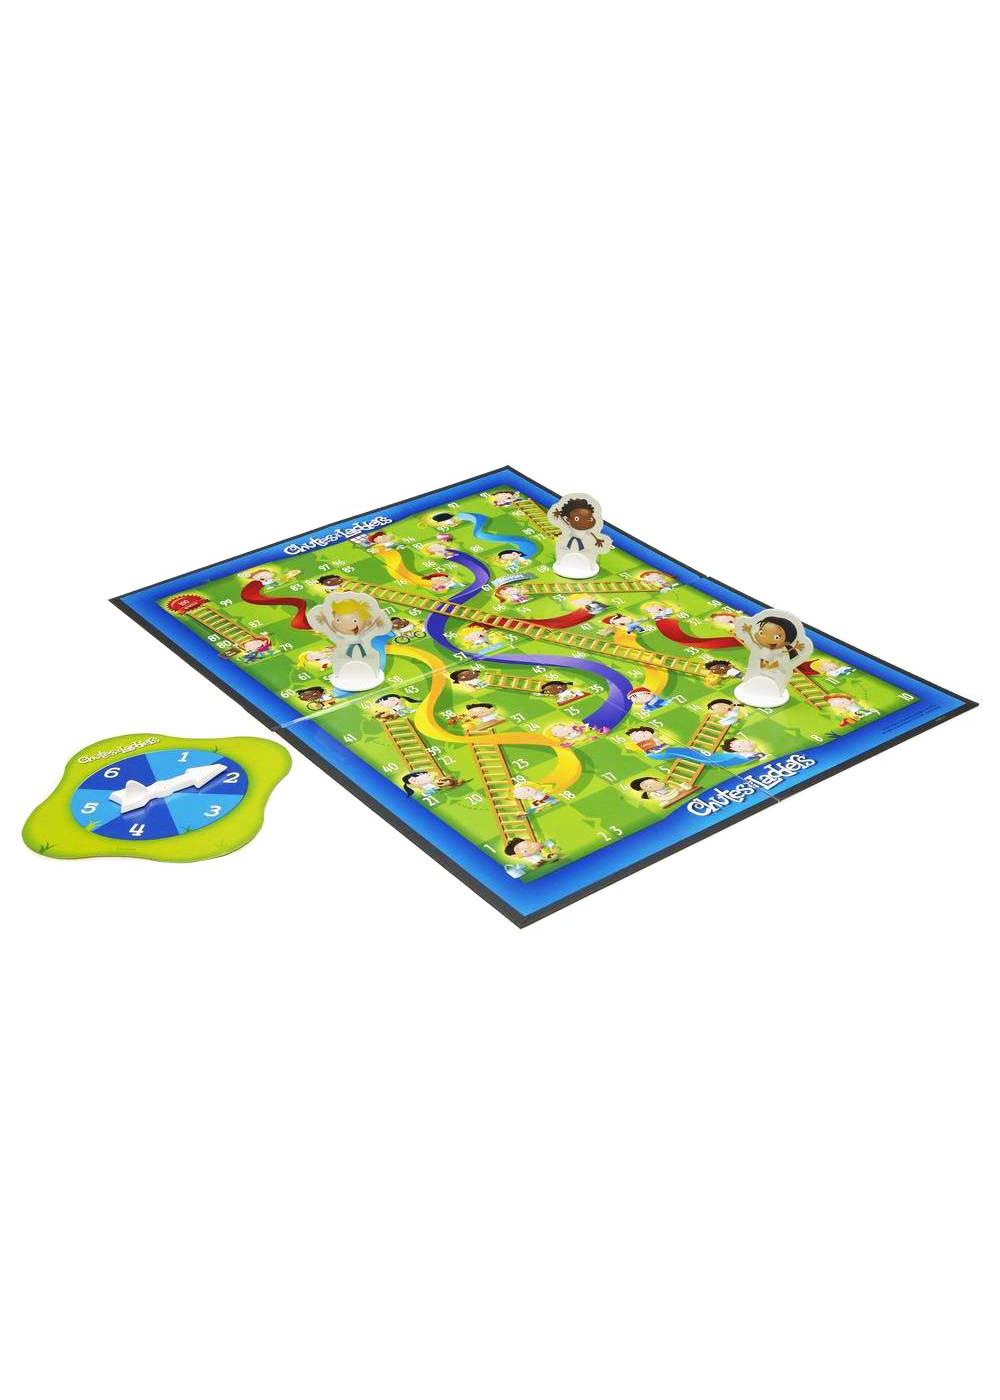 Chutes and Ladders Kids Board Game; image 2 of 2